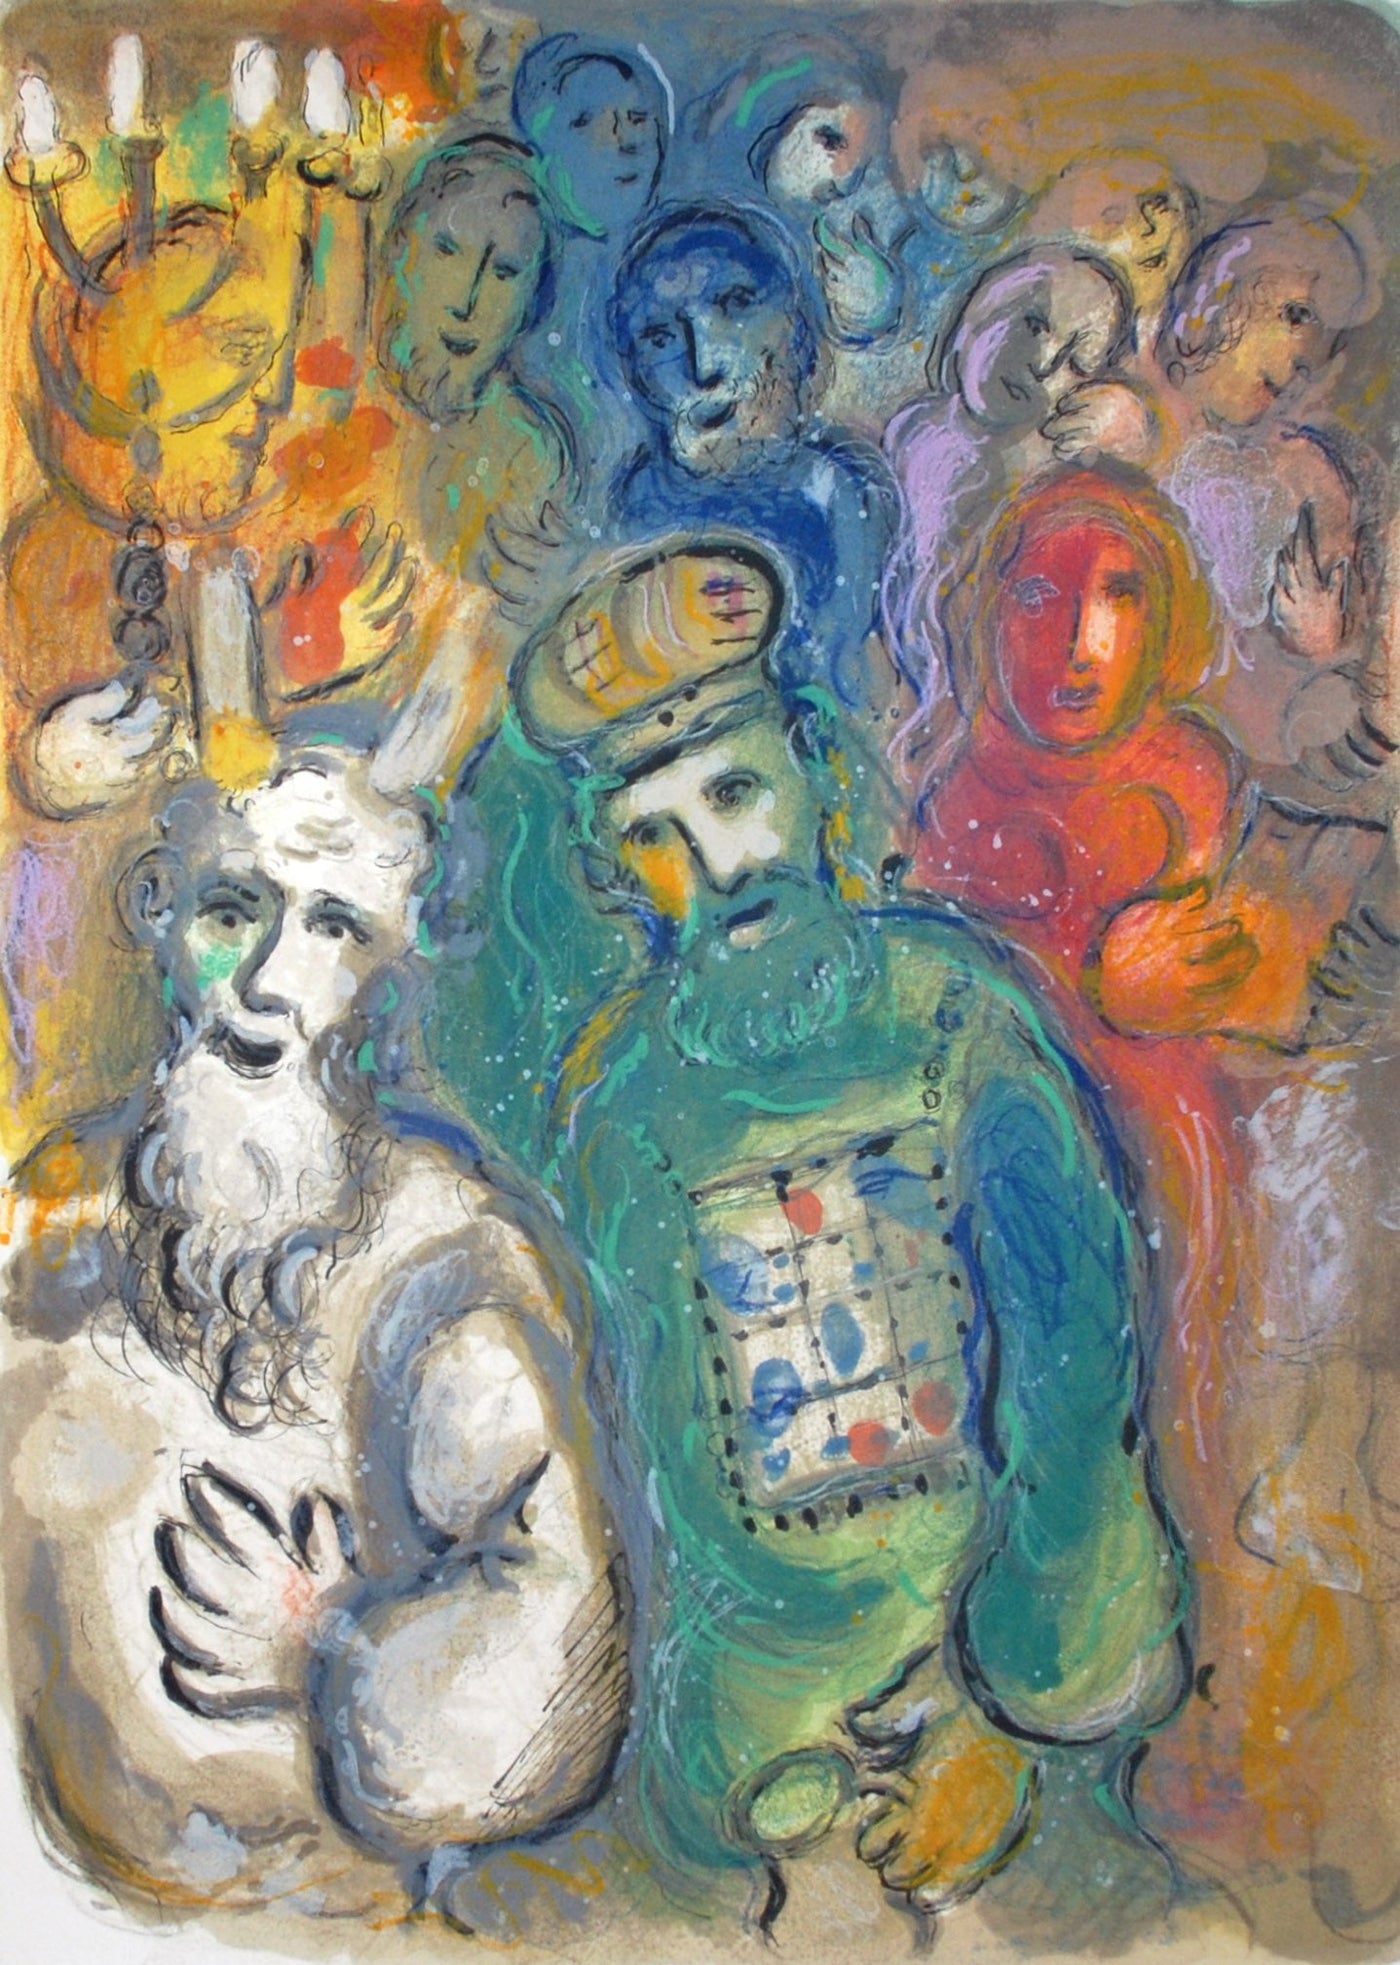 Marc Chagall Moses and Aaron with the Elders, from The Story of Exodus (Mourlot 450, Cramer no.64) 1966